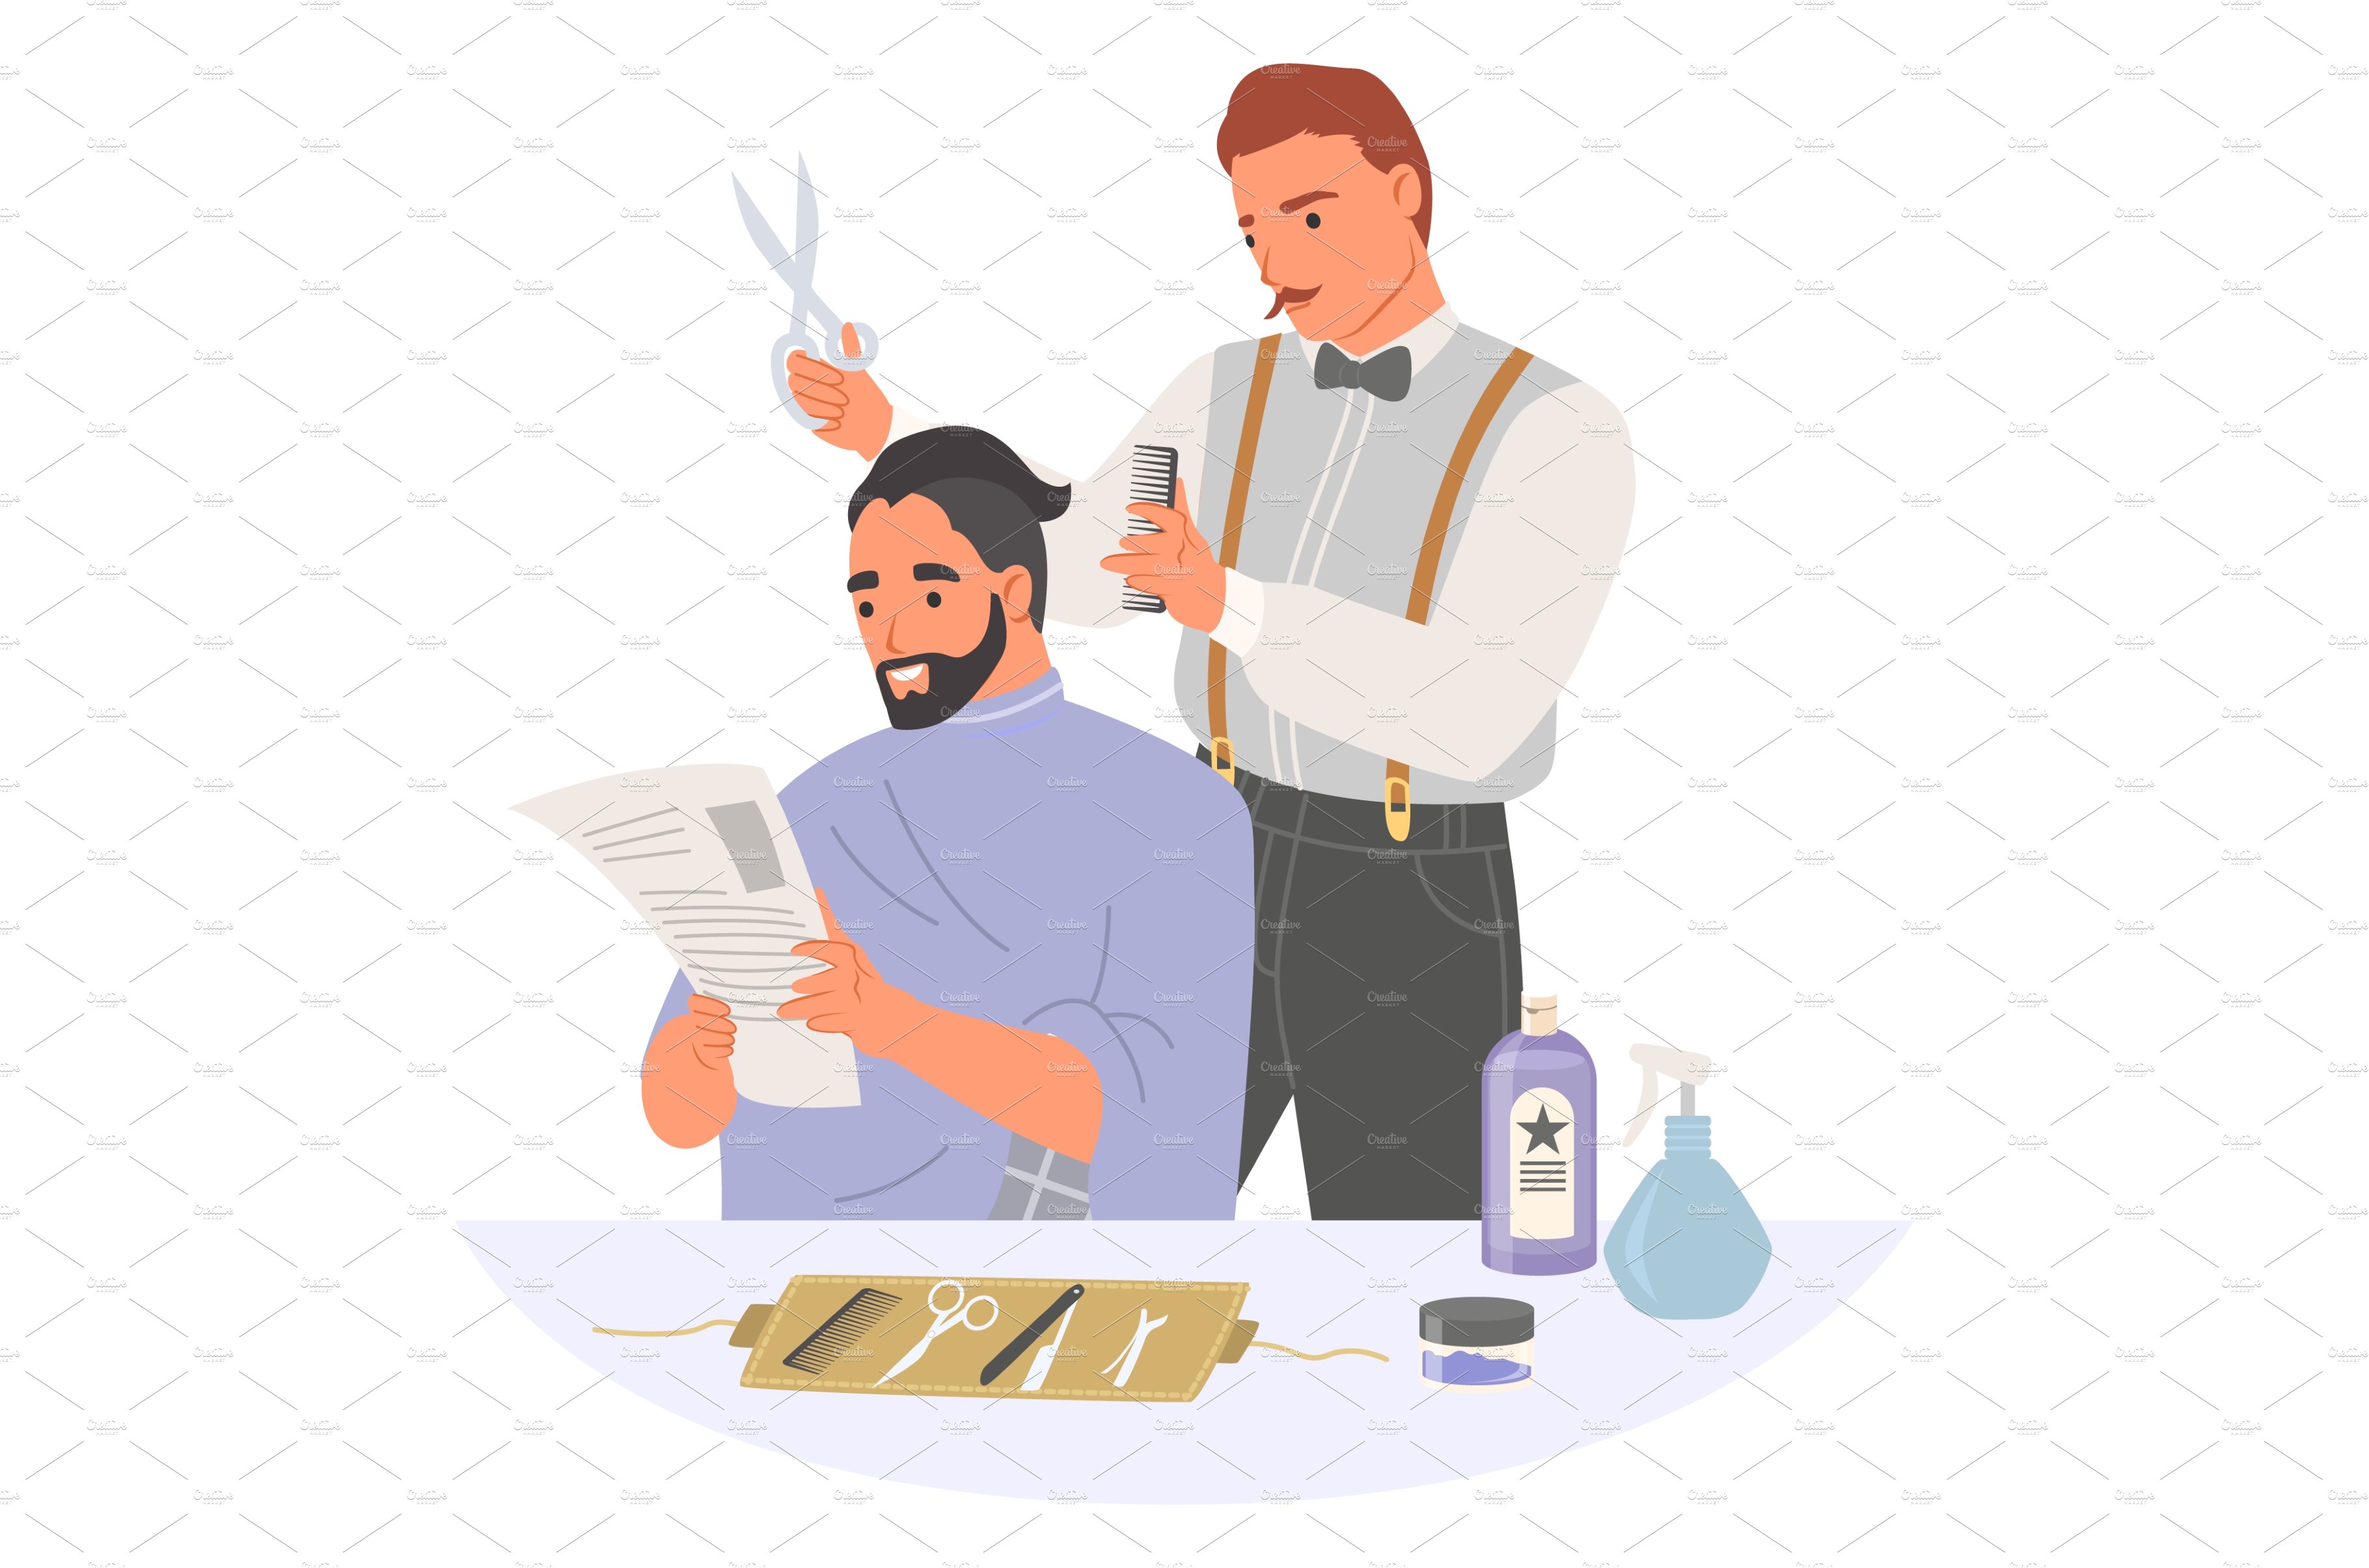 Barber doing haircut for man in cover image.